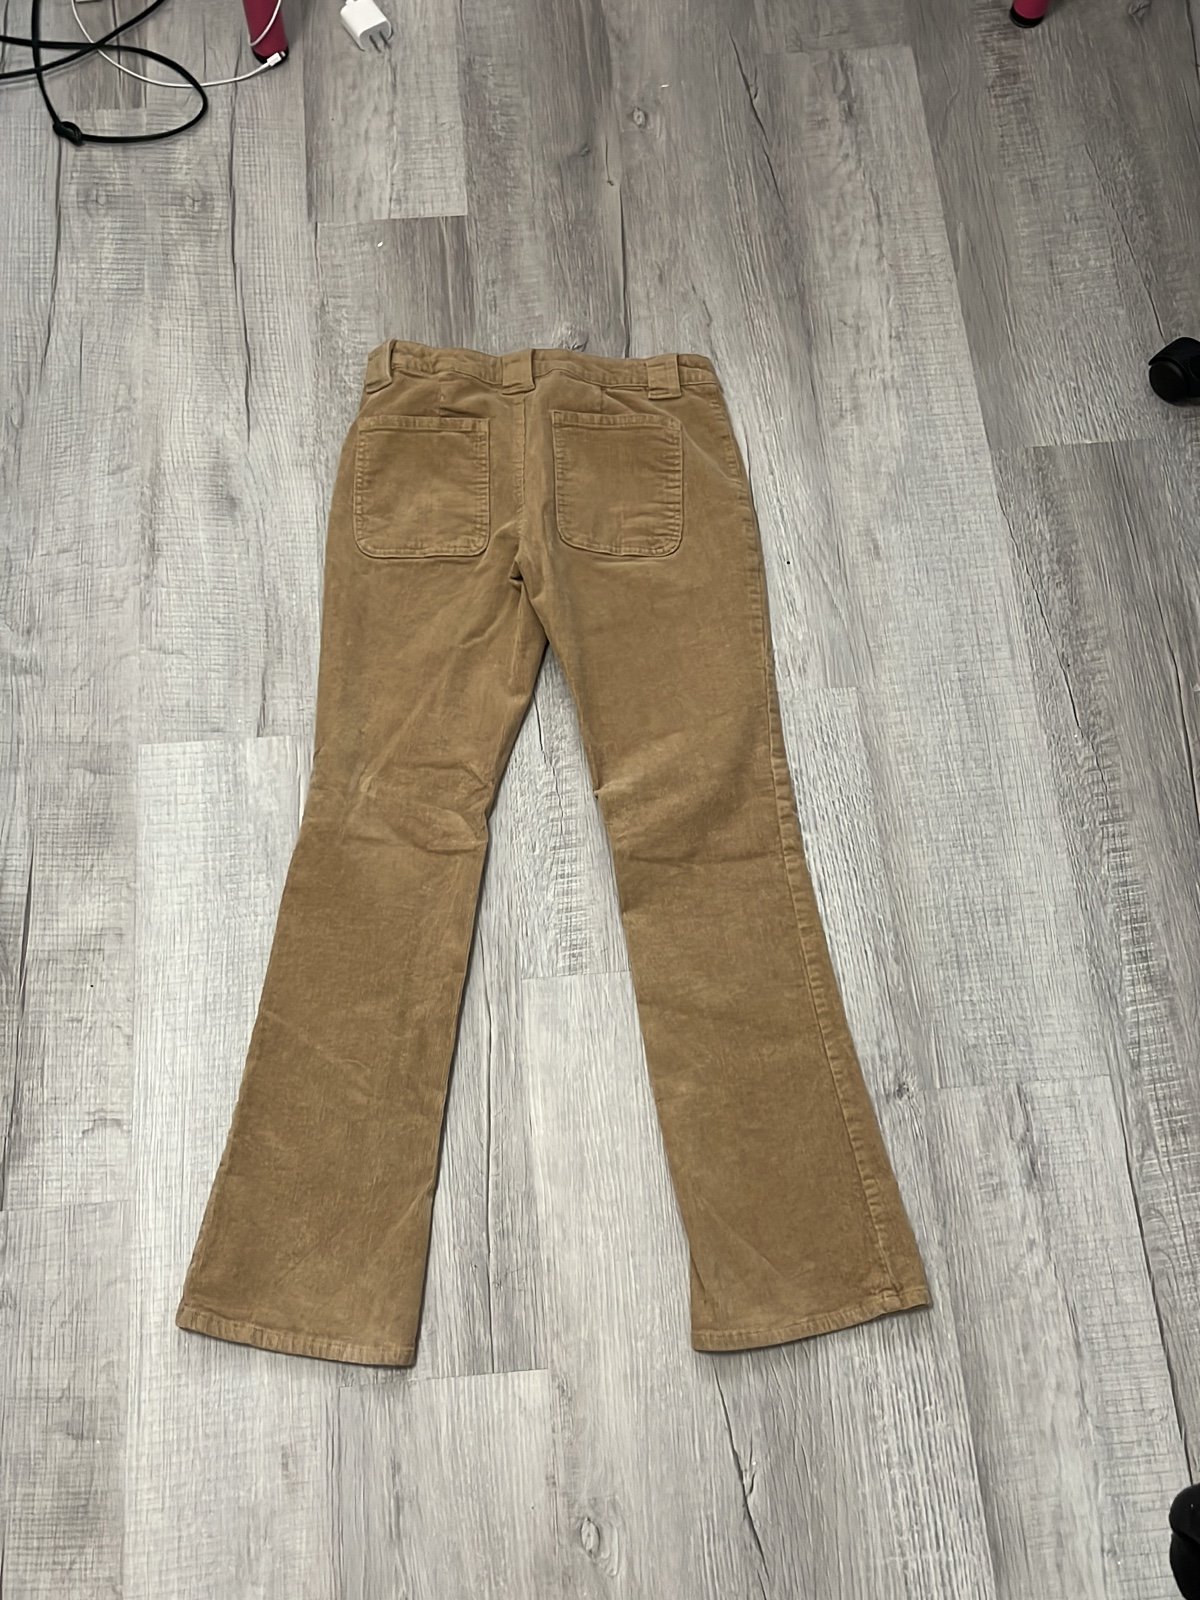 save up to 70% forever 21 bootcut/flare pants G0E5nz2Bp Cool